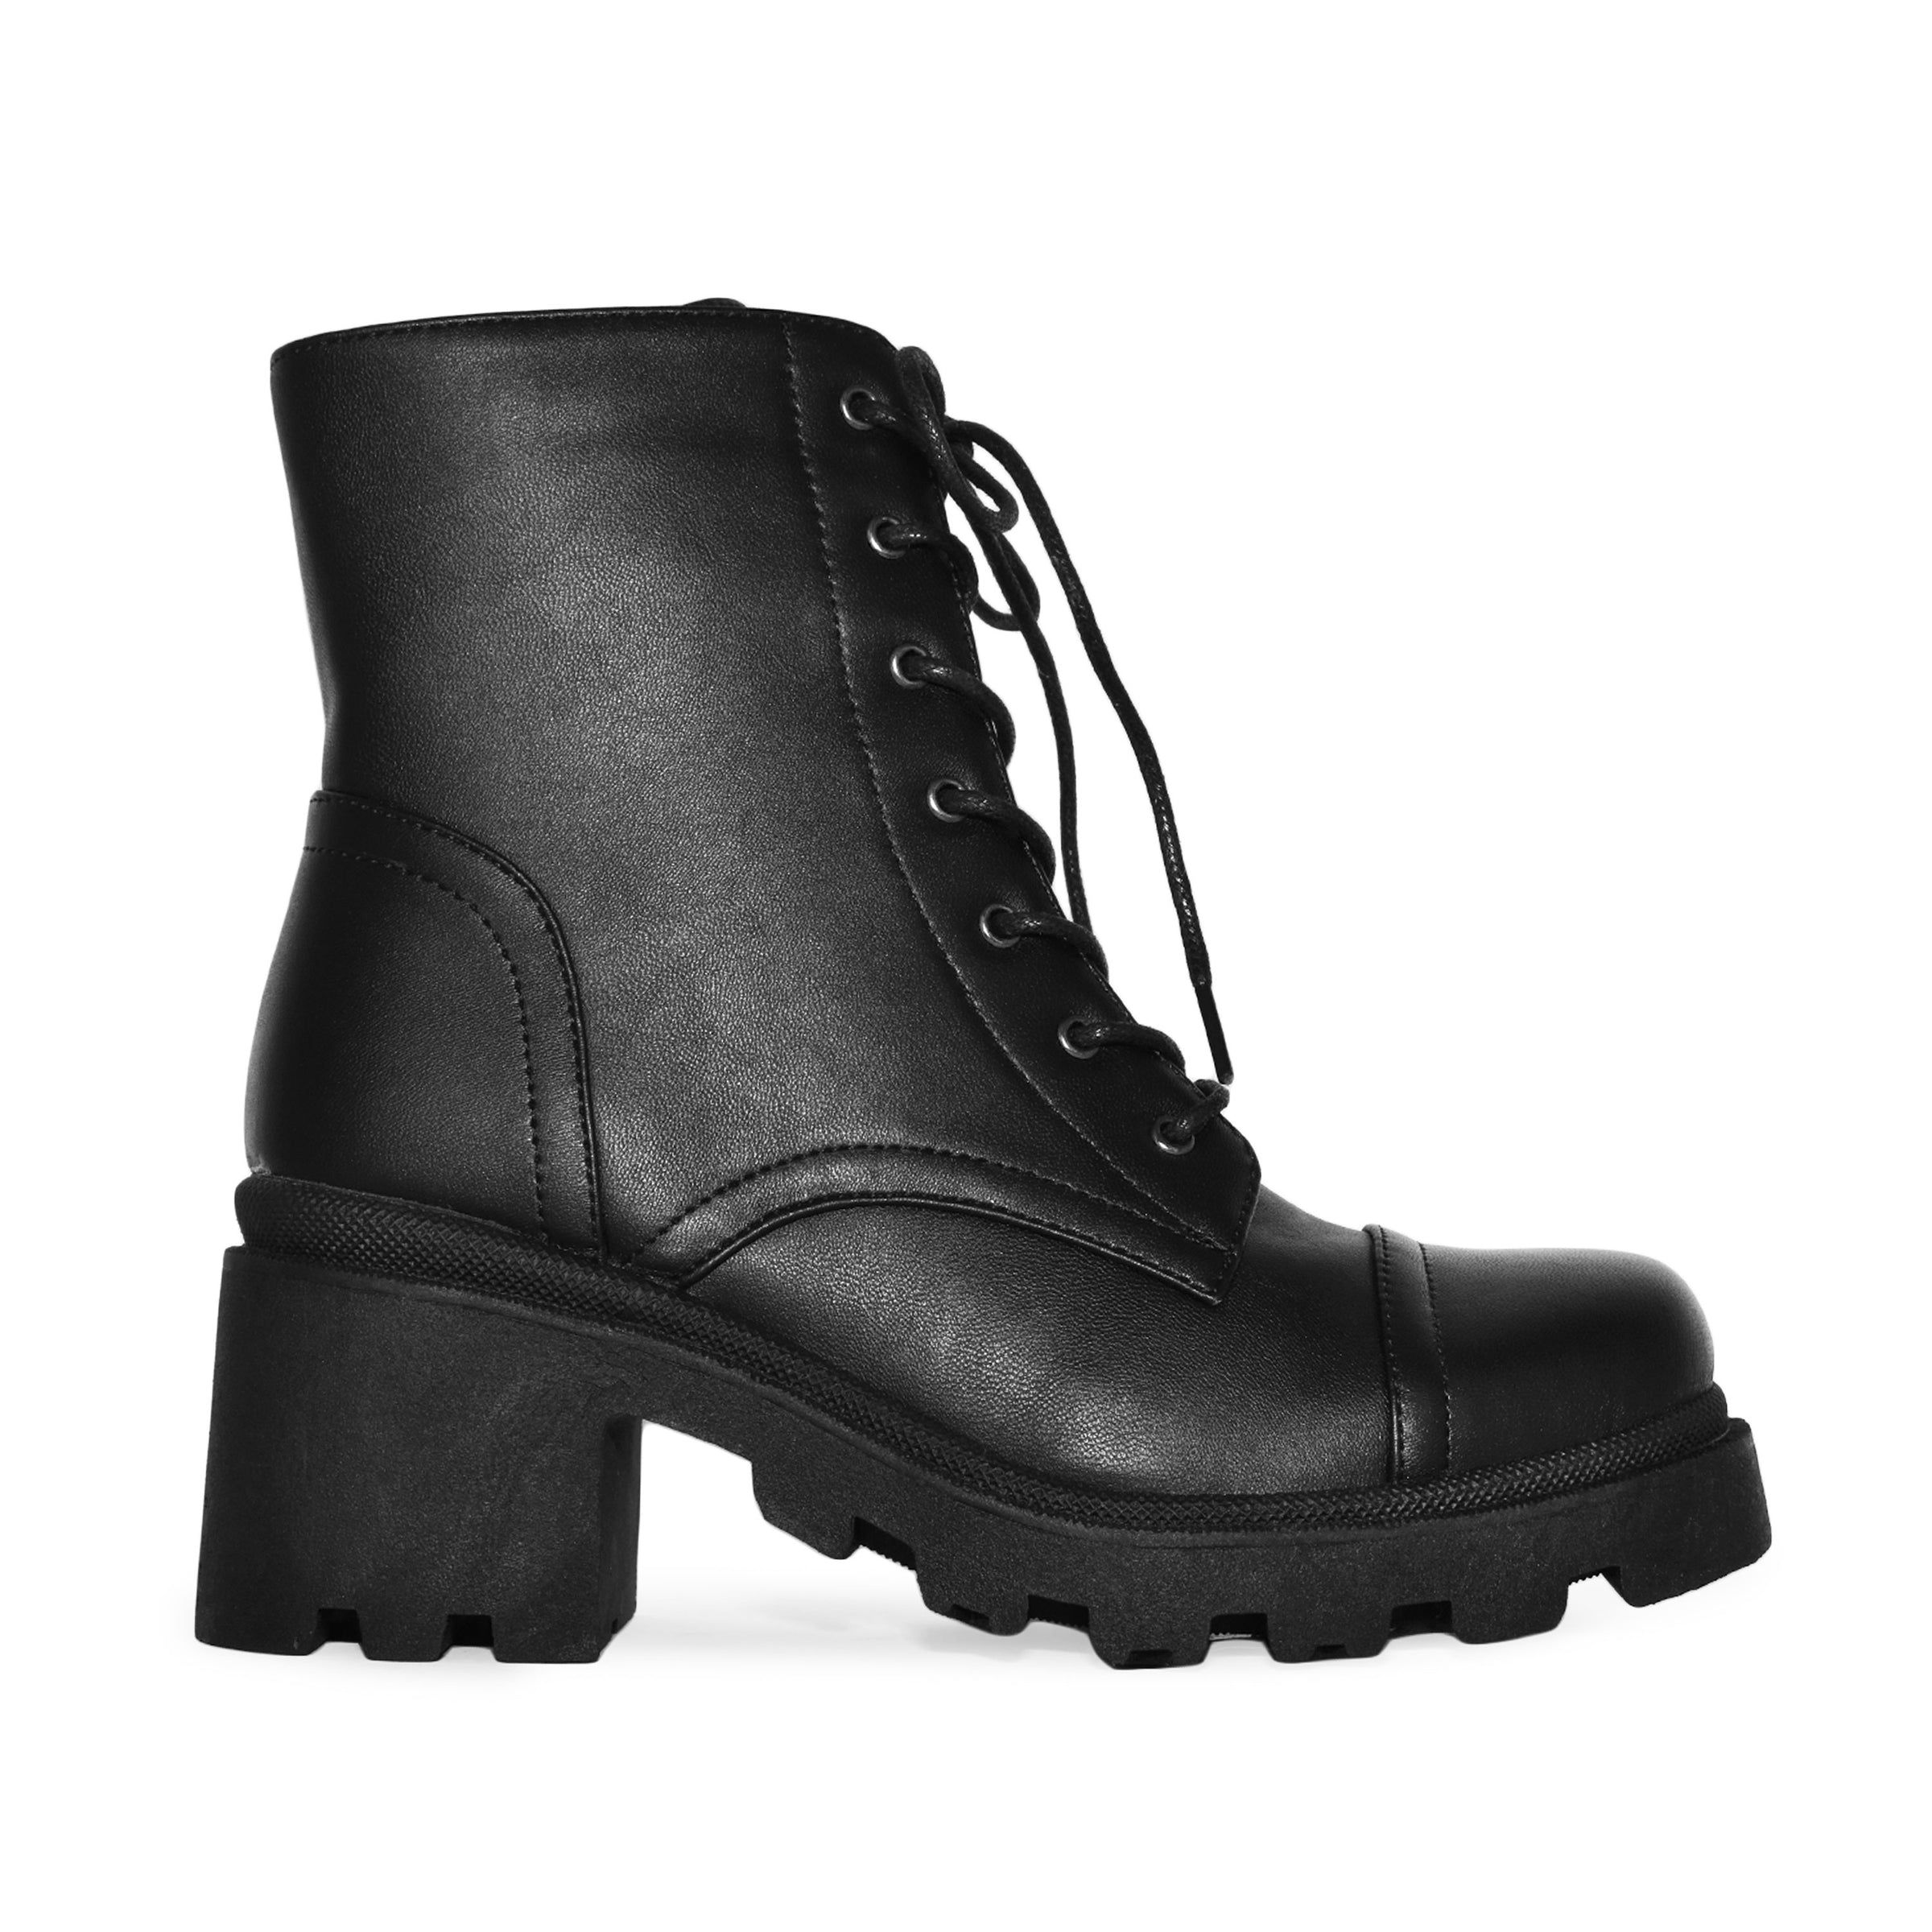 Rilista Platform Boots for Women Chunky High Heels Ankle Booties Square Toe  Side Zipper Punk Boots : Clothing, Shoes & Jewelry - Amazon.com